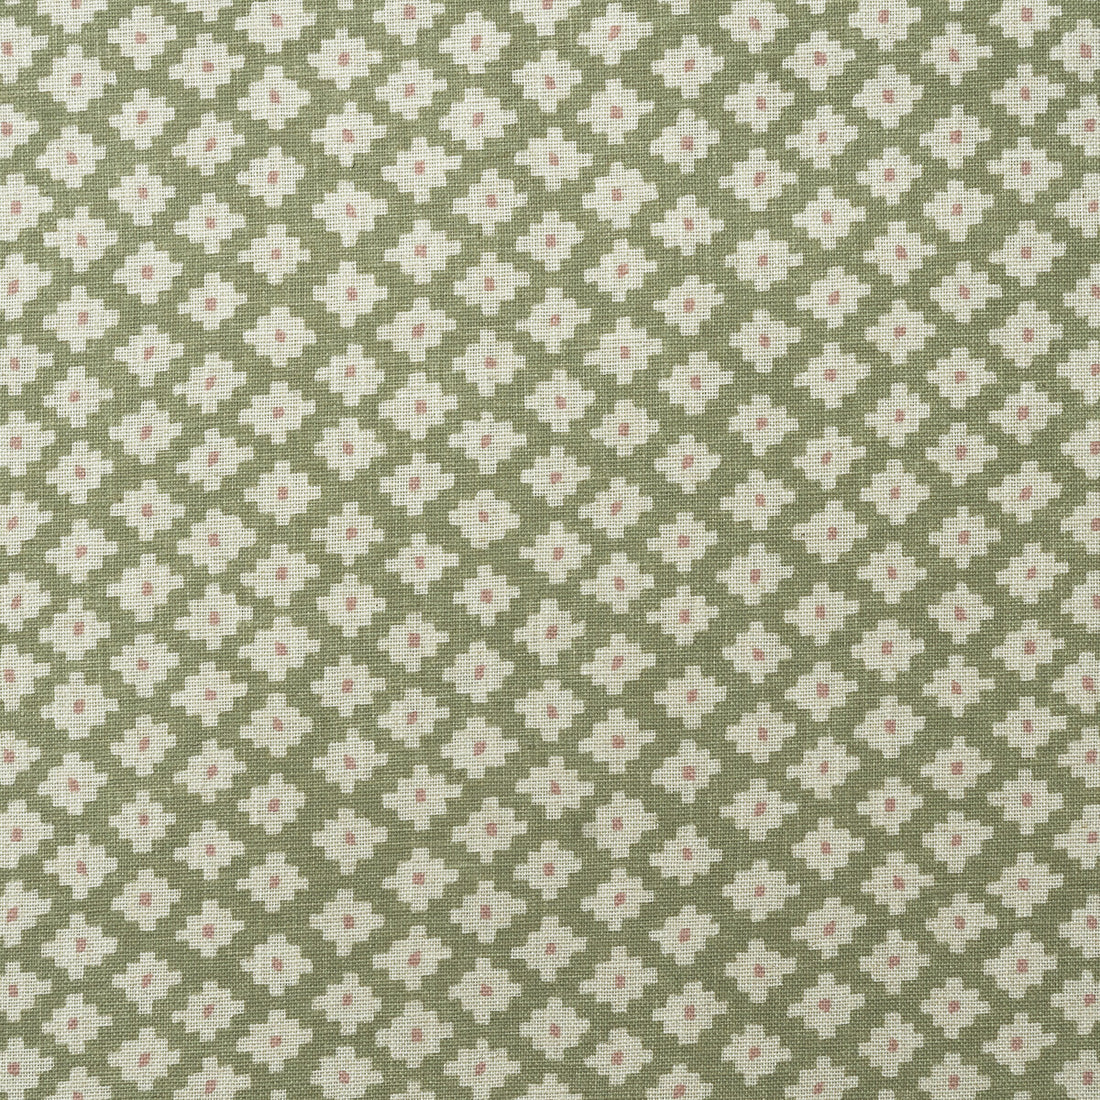 Maze fabric in fennel color - pattern AM100381.123.0 - by Kravet Couture in the Andrew Martin Garden Path collection